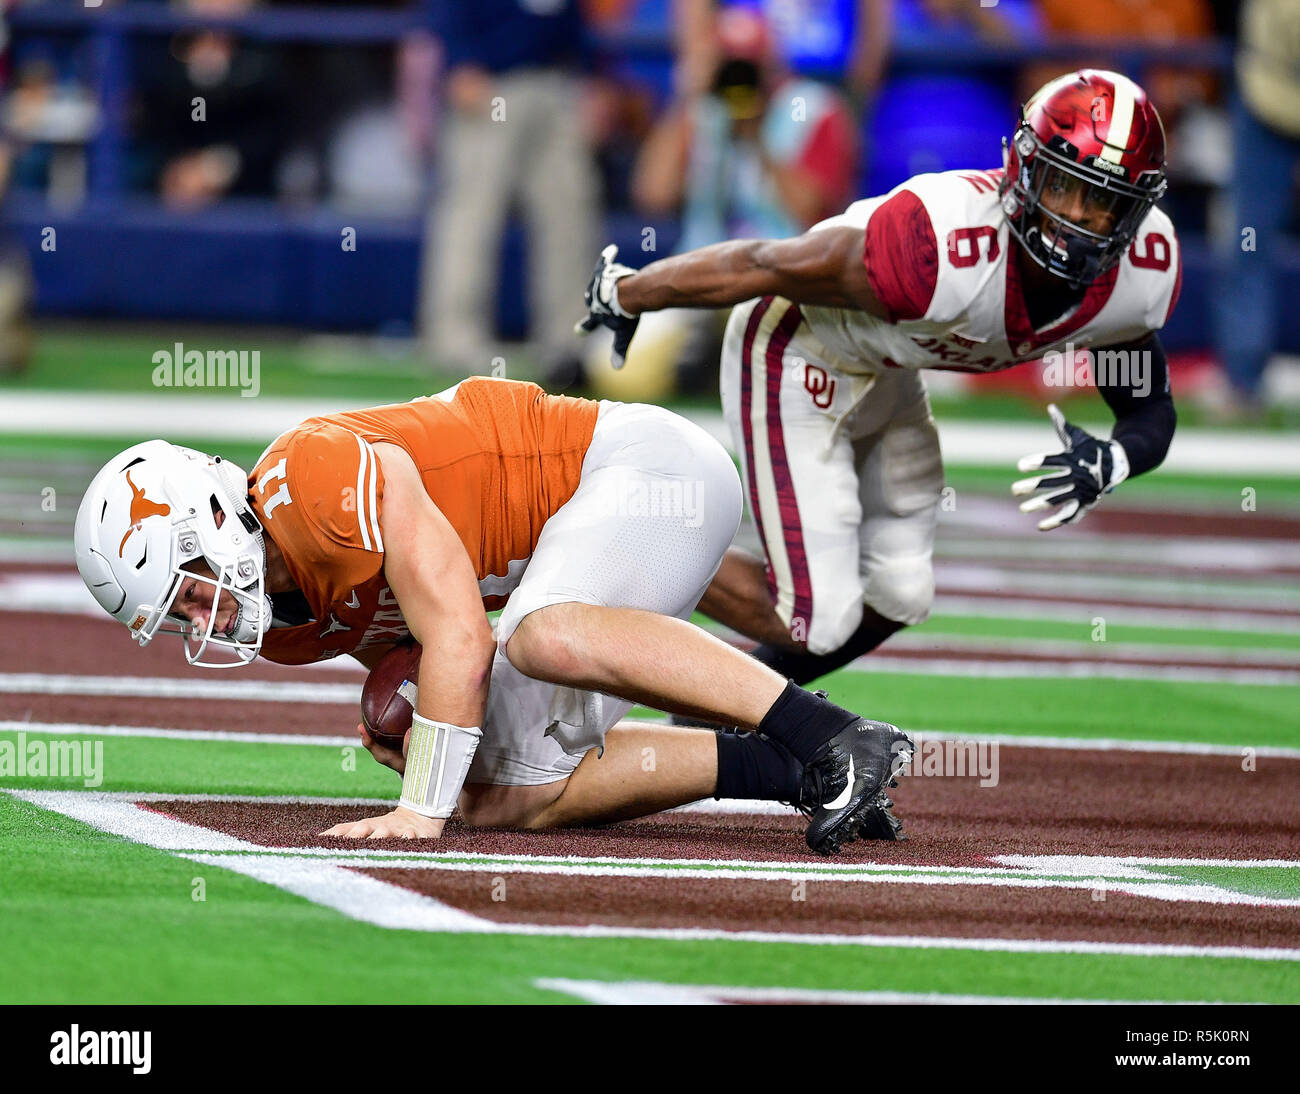 texas-longhorns-quarterback-sam-ehlinger-11-is-hit-hard-in-the-end-zone-for-a-safety-by-oklahoma-cornerback-tre-brown-6-during-the-dr-pepper-big-12-championship-between-the-oklahoma-sooners-vs-texas-longhorns-at-an-ncaa-big-12-championship-football-game-at-the-att-stadium-arlington-texas-120118manny-florescal-sport-media-R5K0RN.jpg